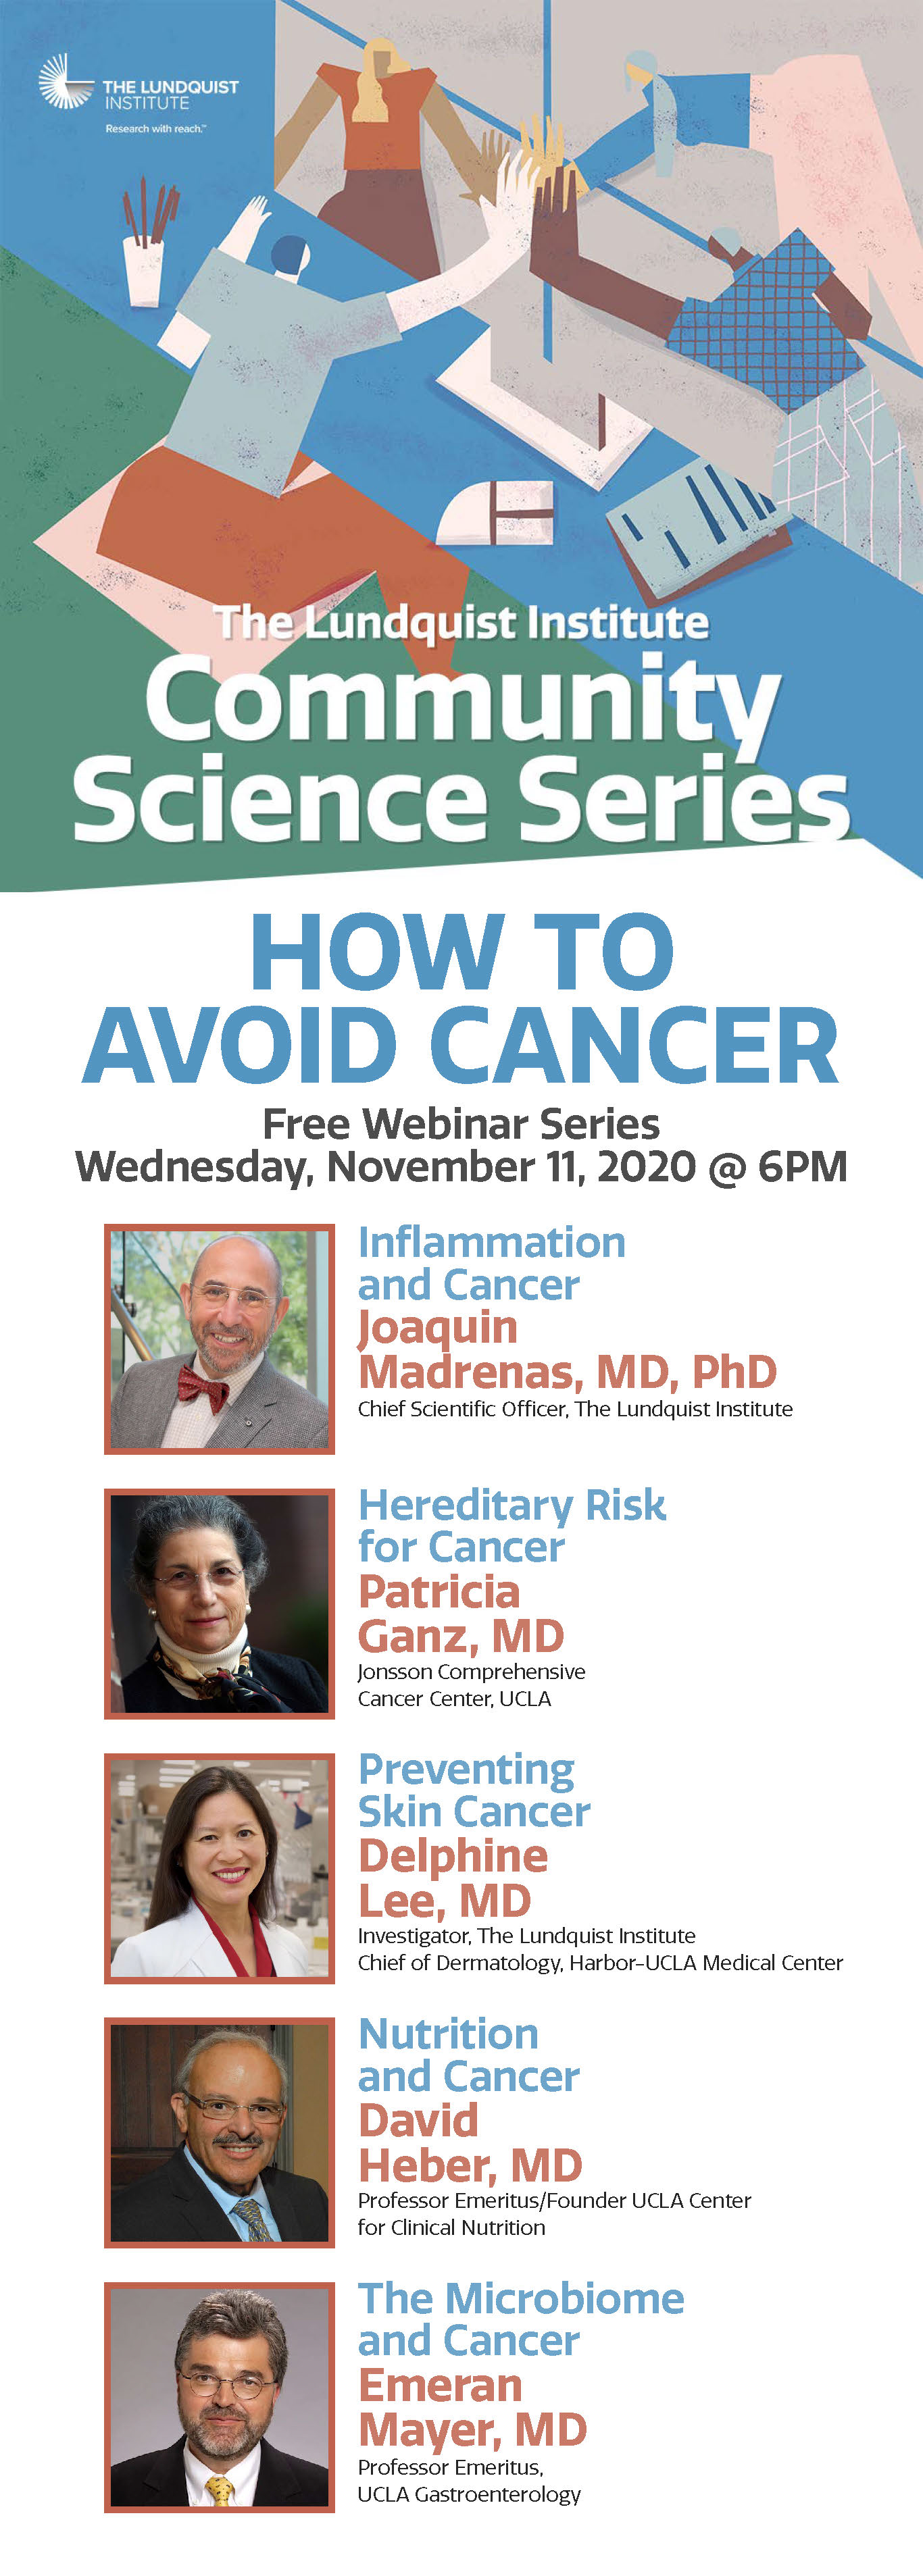 Community Science Series - How to Avoid Cancer